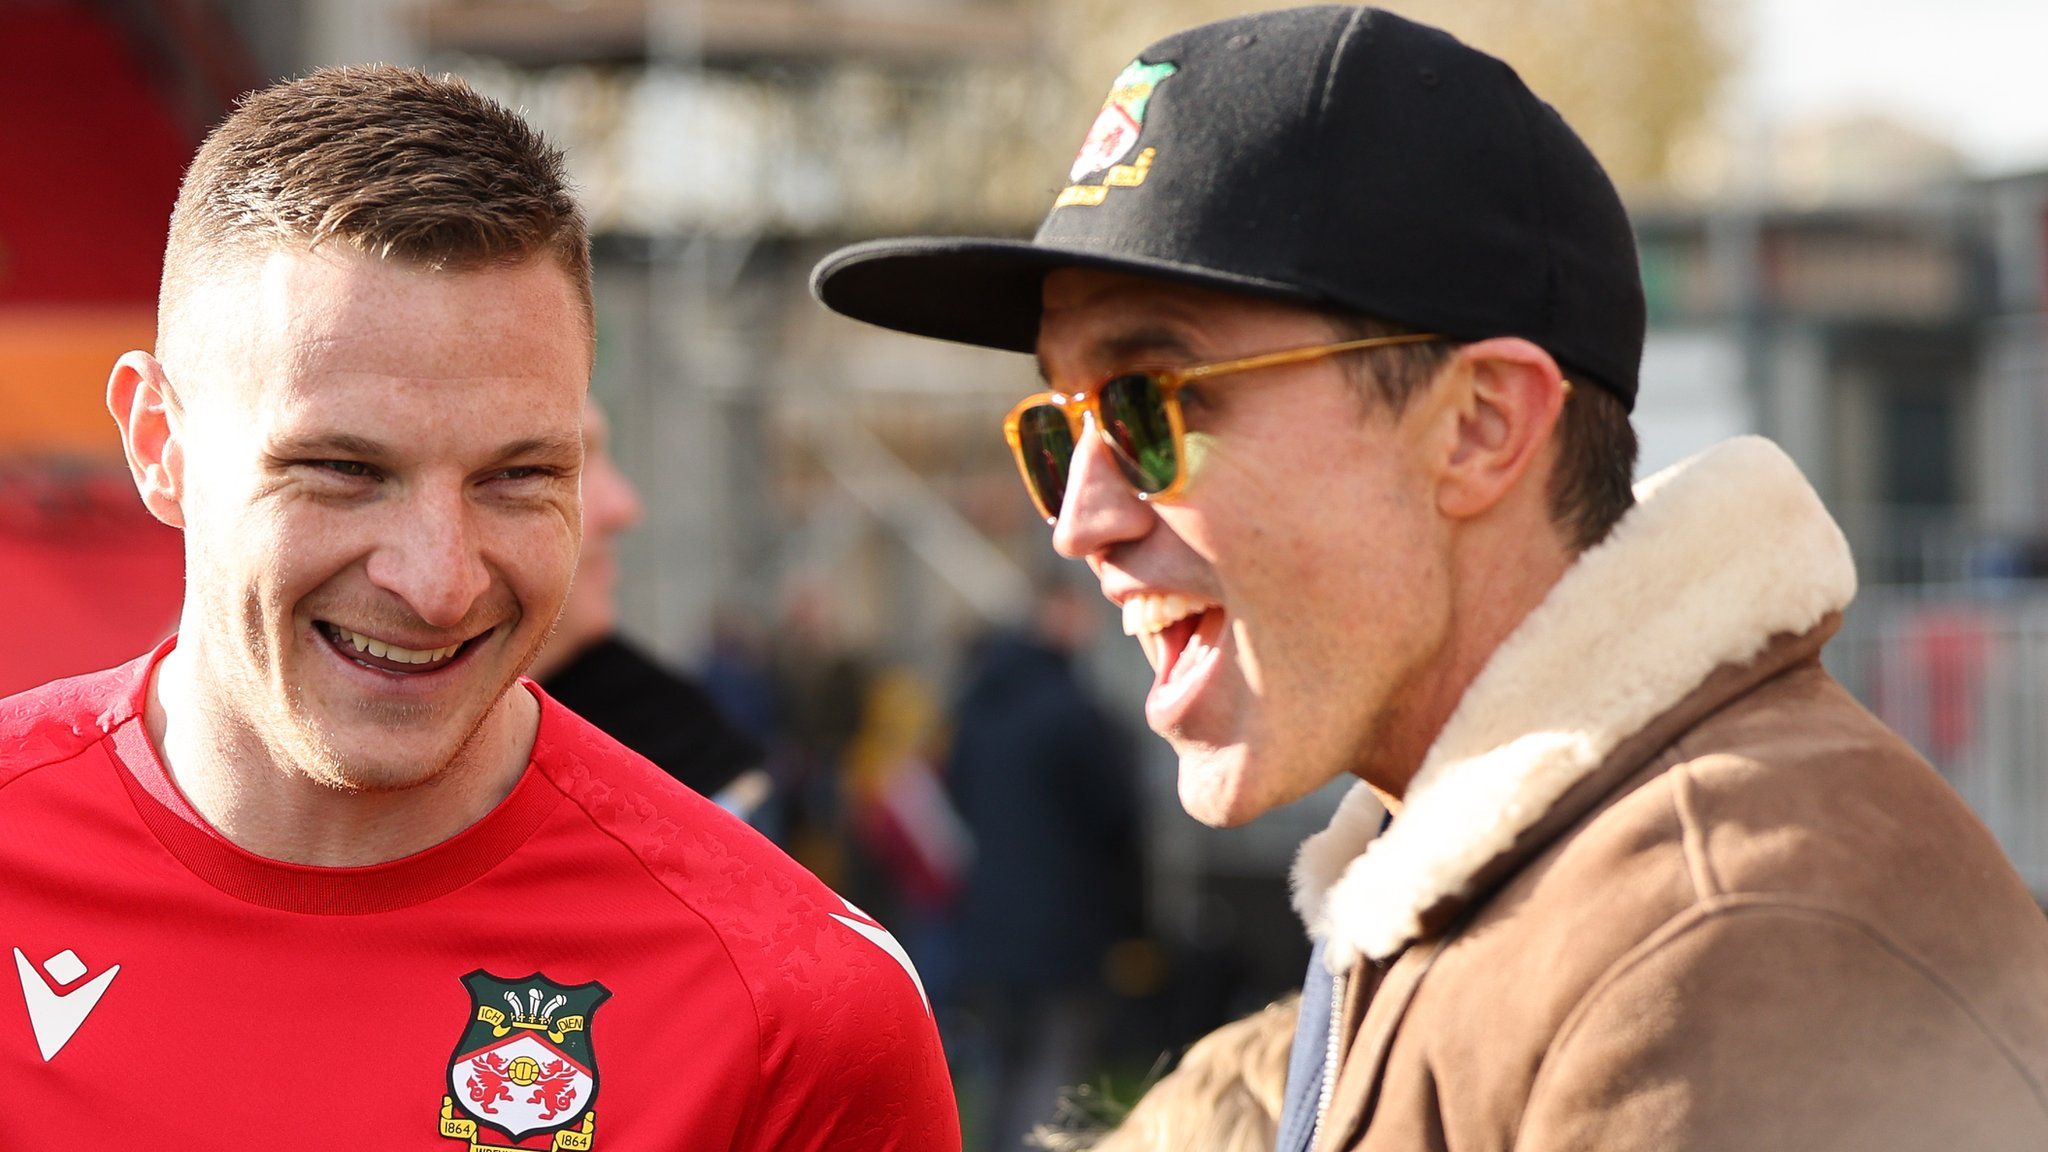 Wrexham striker Paul Mullin chats to American actor and co-owner of Wrexham Football Club, Rob McElhenney after their win against Notts County